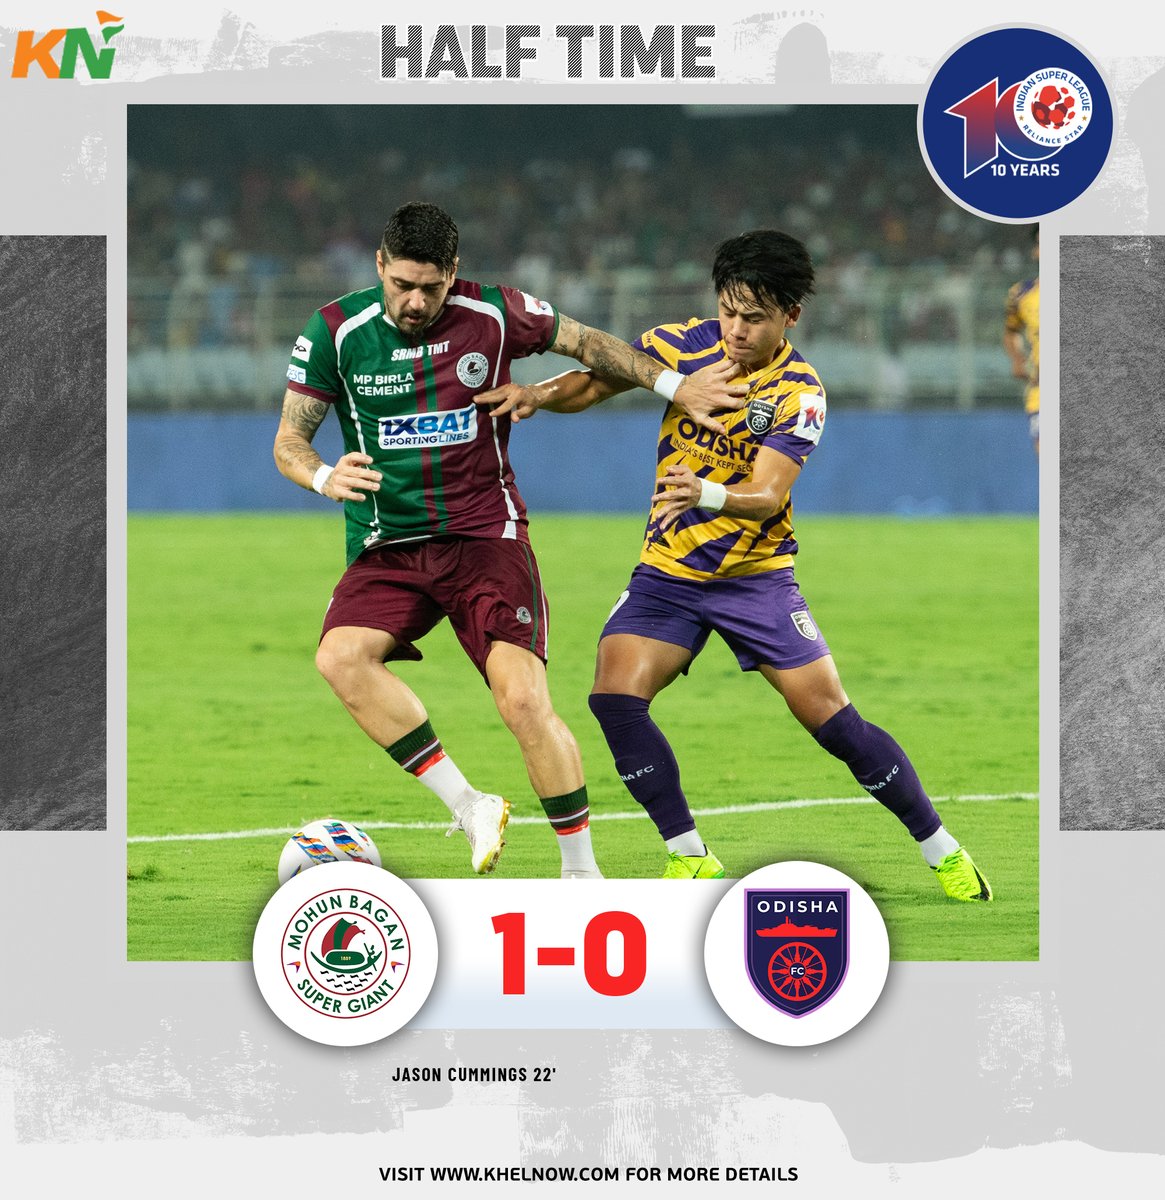 Job half done👀 Mohun Bagan leads at halftime, but they need one more goal to overcome Odisha FC in the ISL semis 🔥

#IndianFootball #ISL #ISL10 #LetsFootball #MohunbaganSupergiants #OdishaFC #OFC #MBSGOFC #MBSG